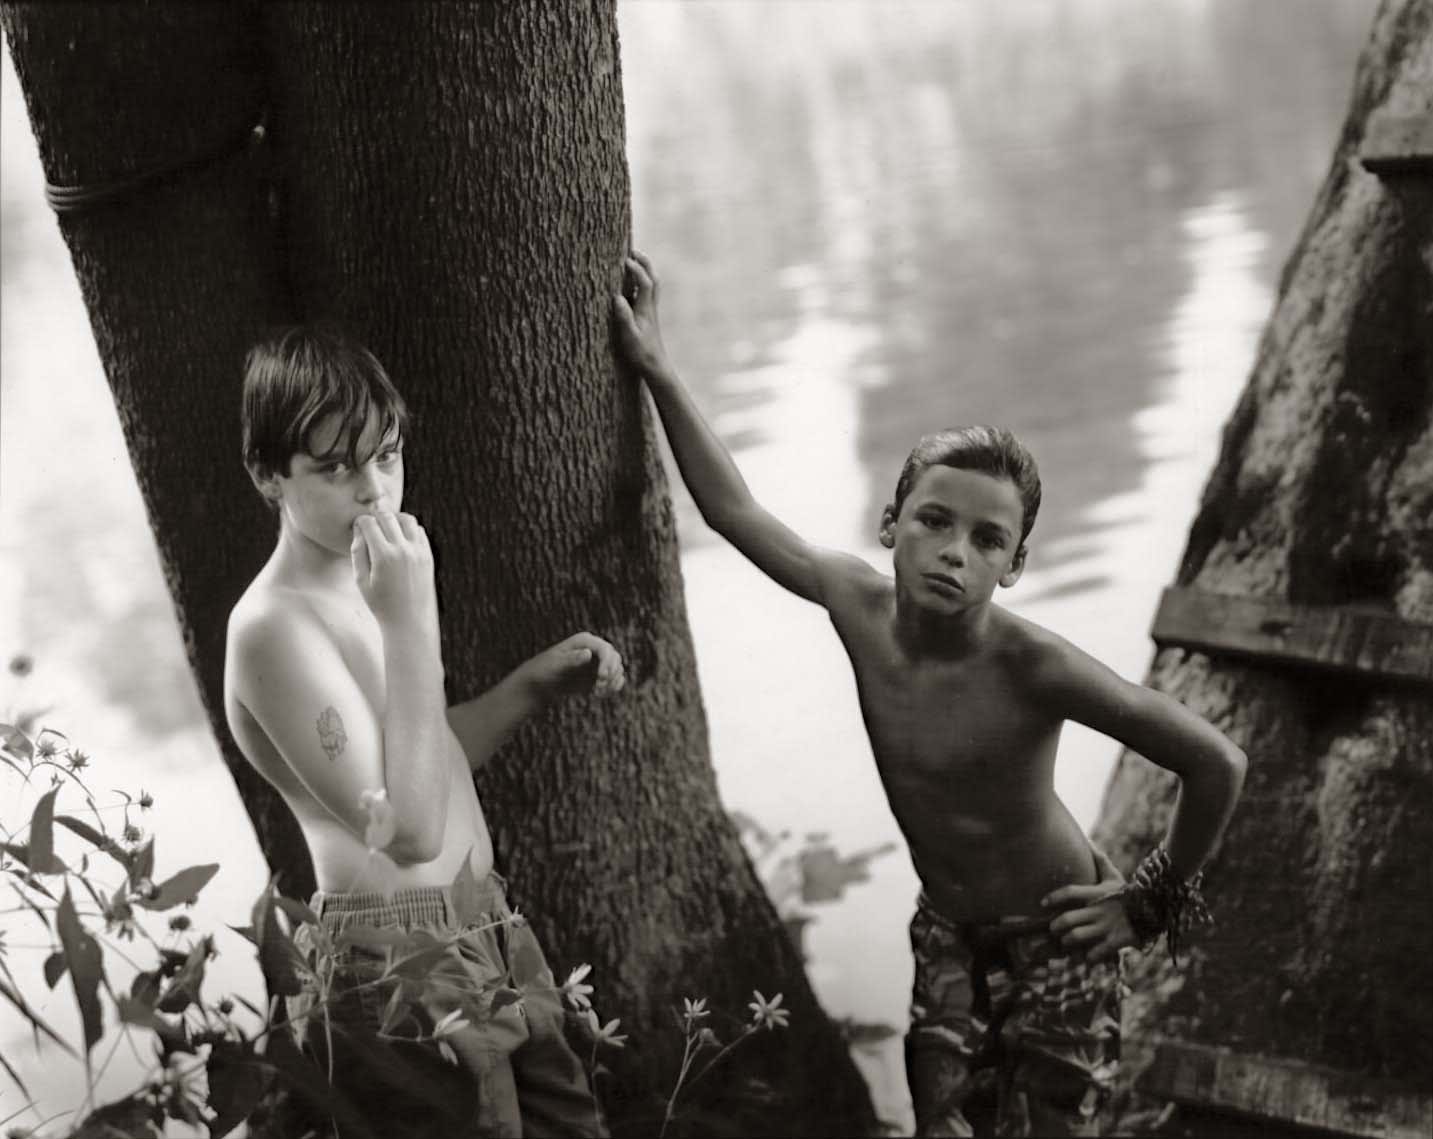 Emmett and the white boy after swimming, from the Immediate Family series by Sally Mann